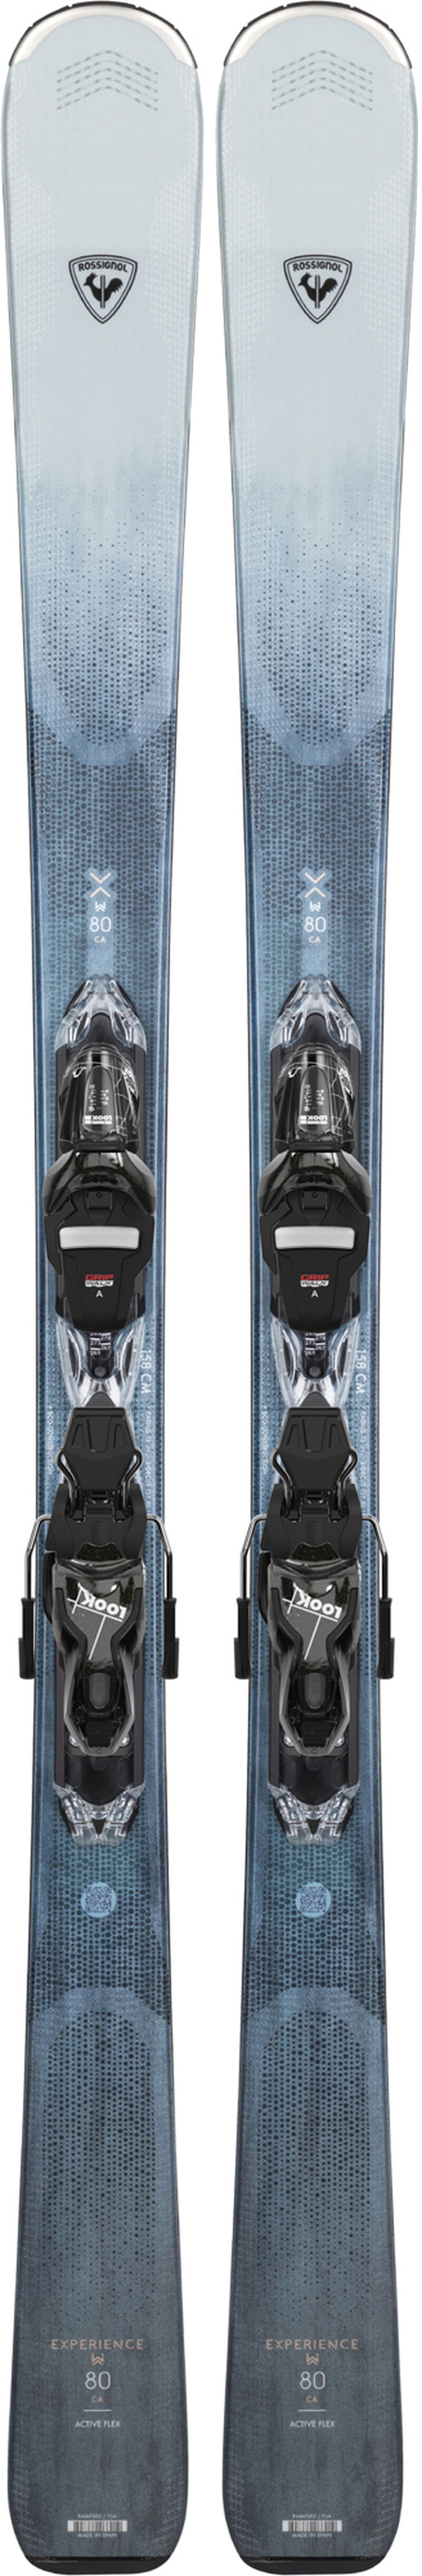 Rossignol DAMEN ALL MOUNTAIN SKIER EXPERIENCE W 80 CARBON (XPRESS) 